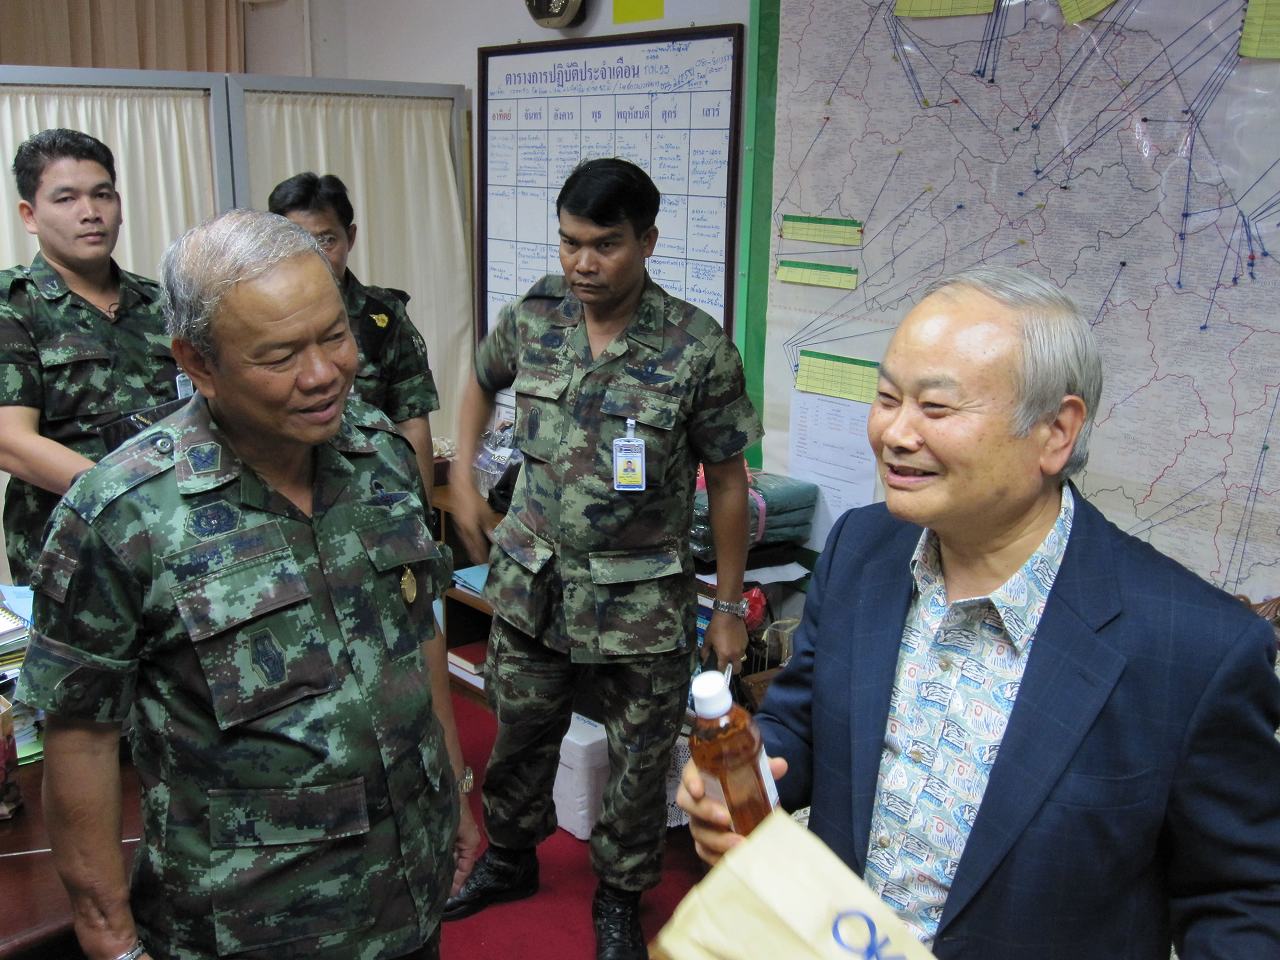 Prof. Higa during his visit to Thailand along with former General Pichate of the Royal Thai Army